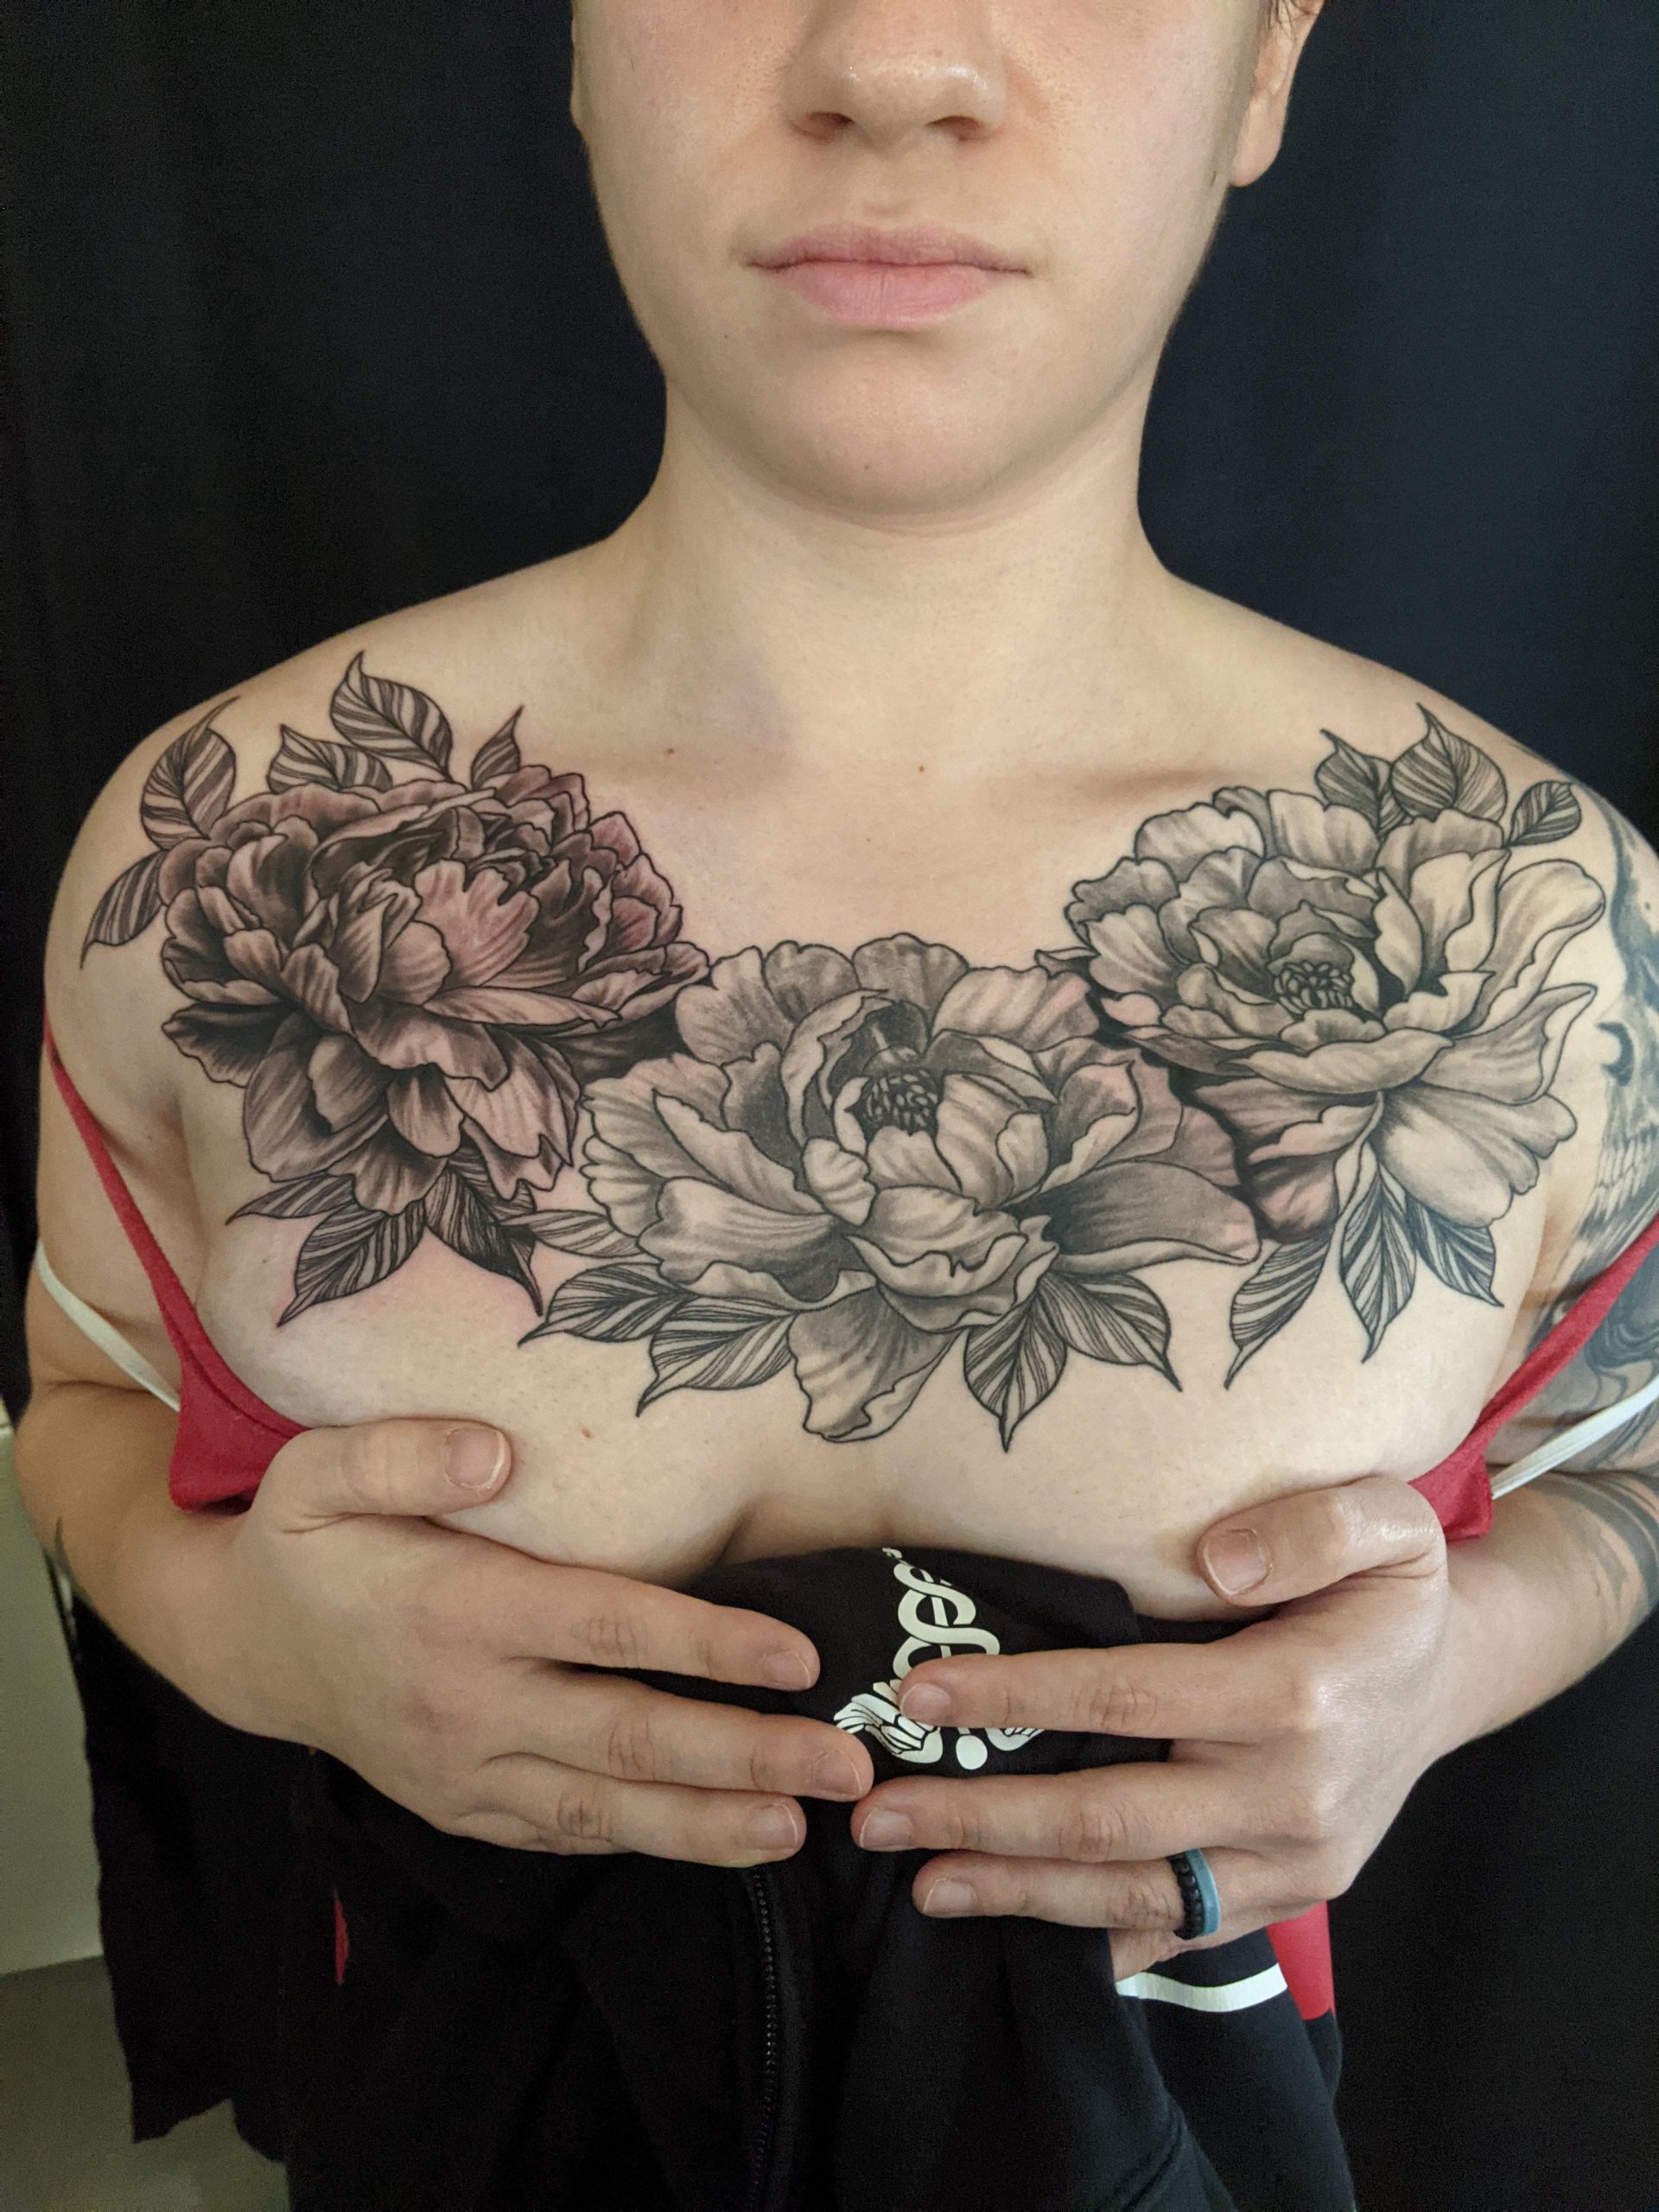 Finished This Chest Piece On Shariana At Visuallyspeaking In Mesa Az